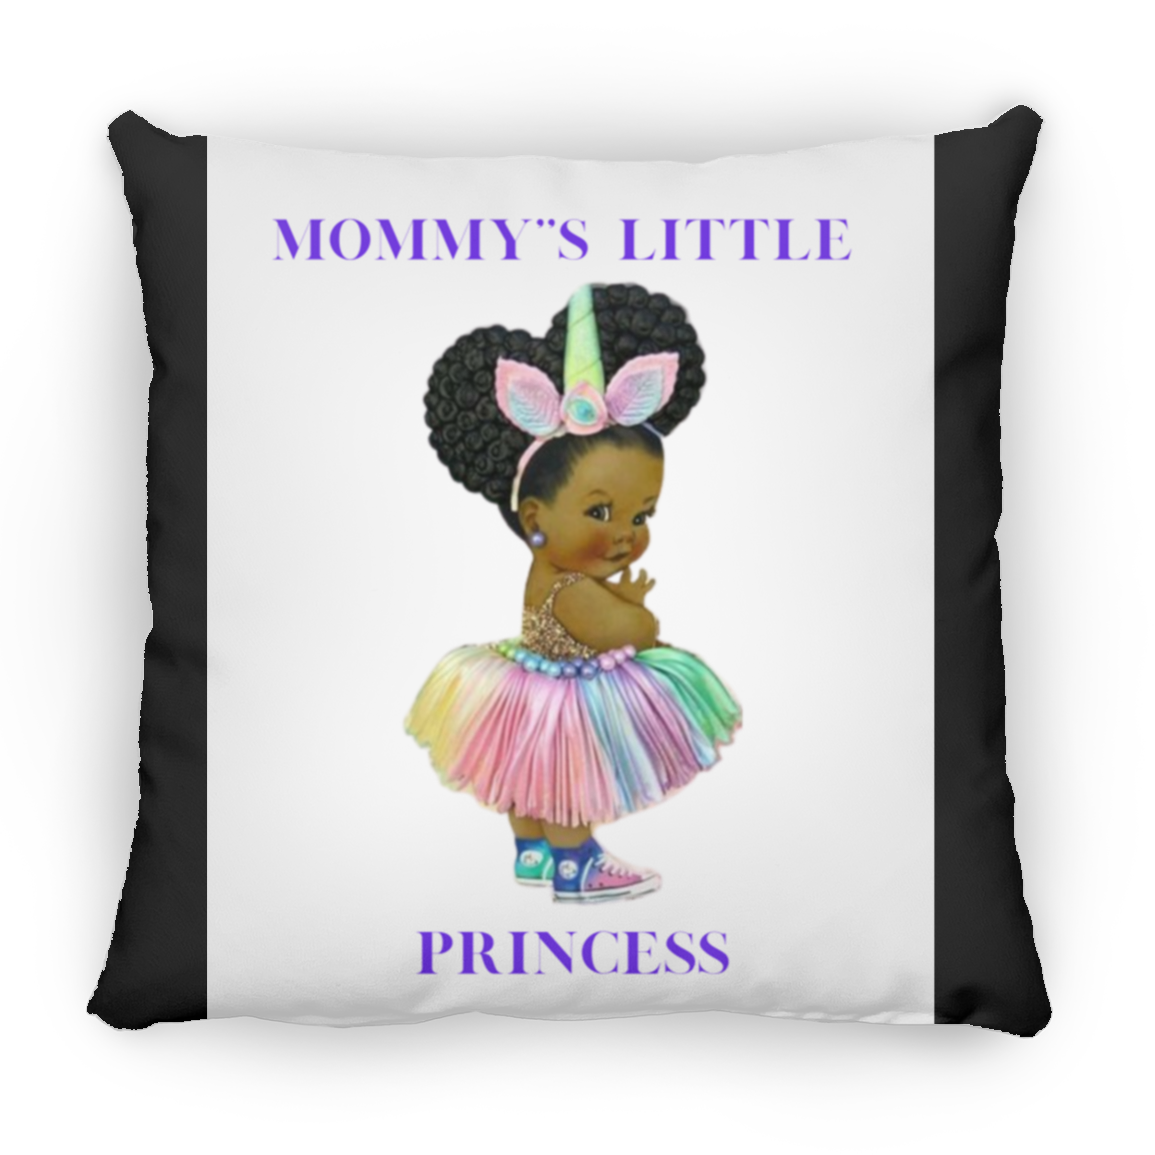 Mommy's Little Princess Large Square Pillow